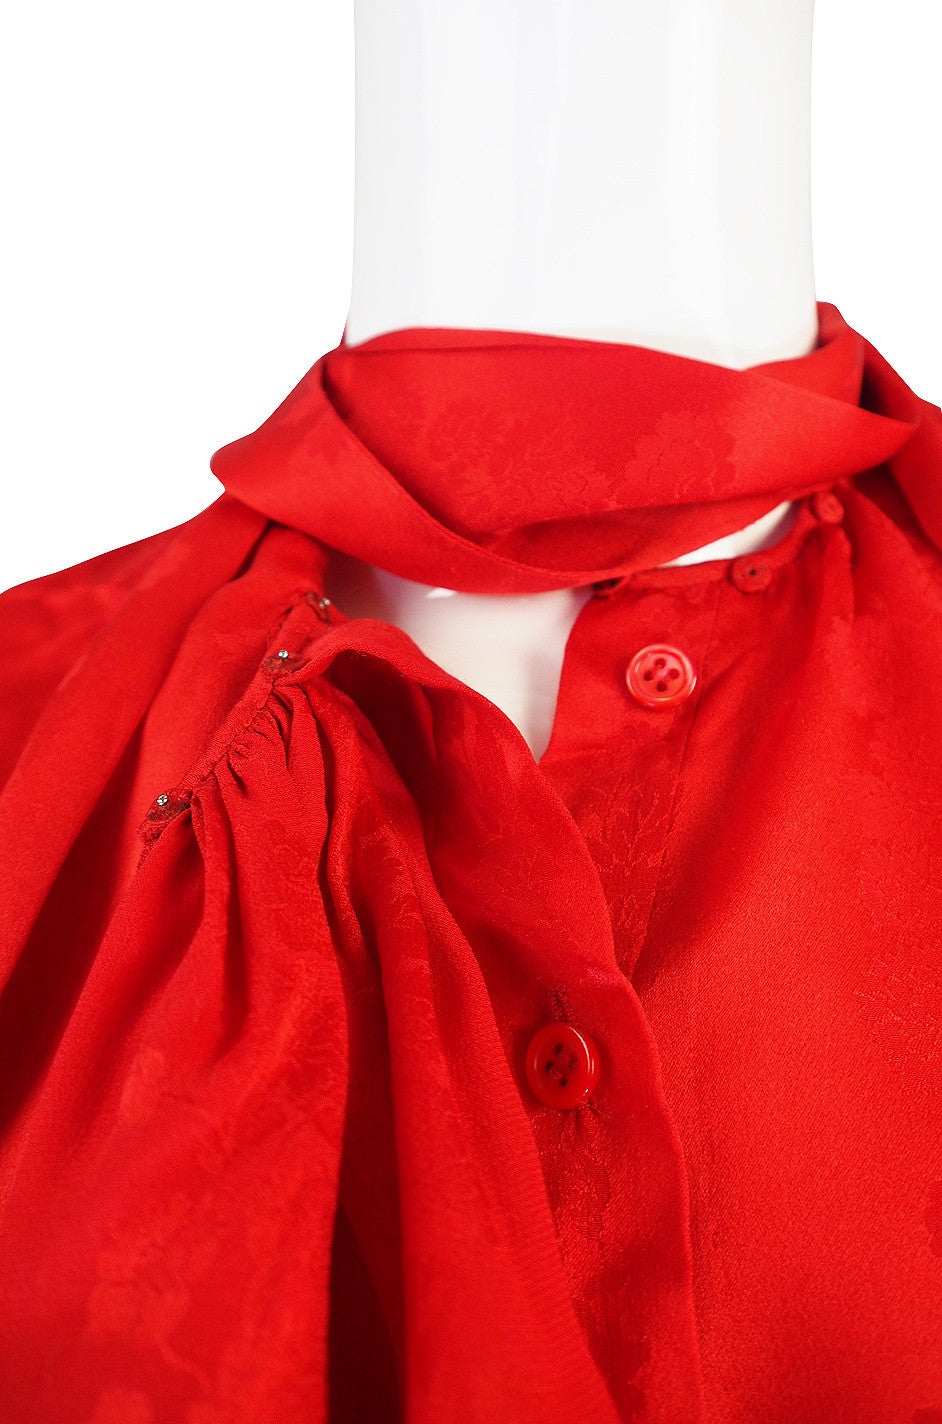 1979 Yves Saint Laurent Haute Couture Red Silk Top For Sale 1